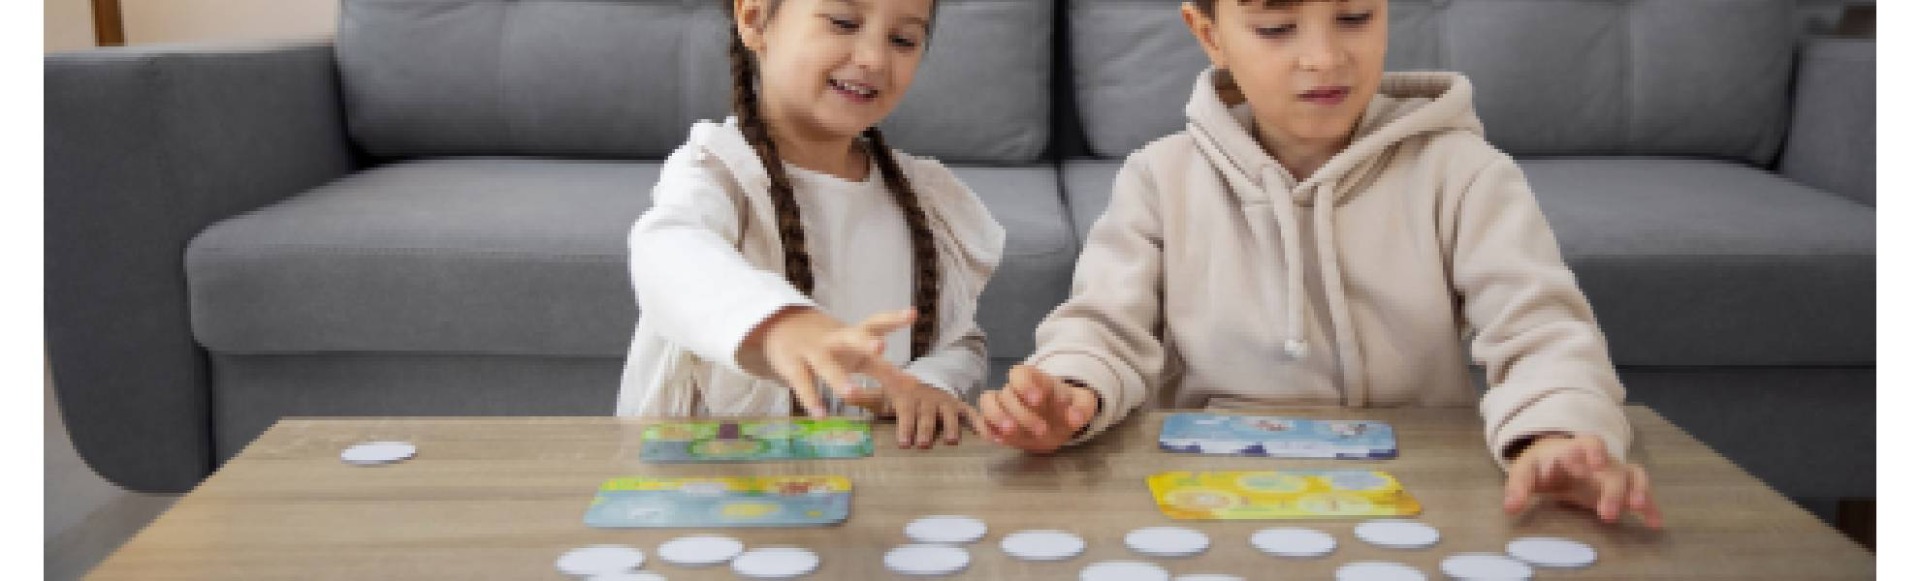 a boy and a girl playing with games and toys on children's development